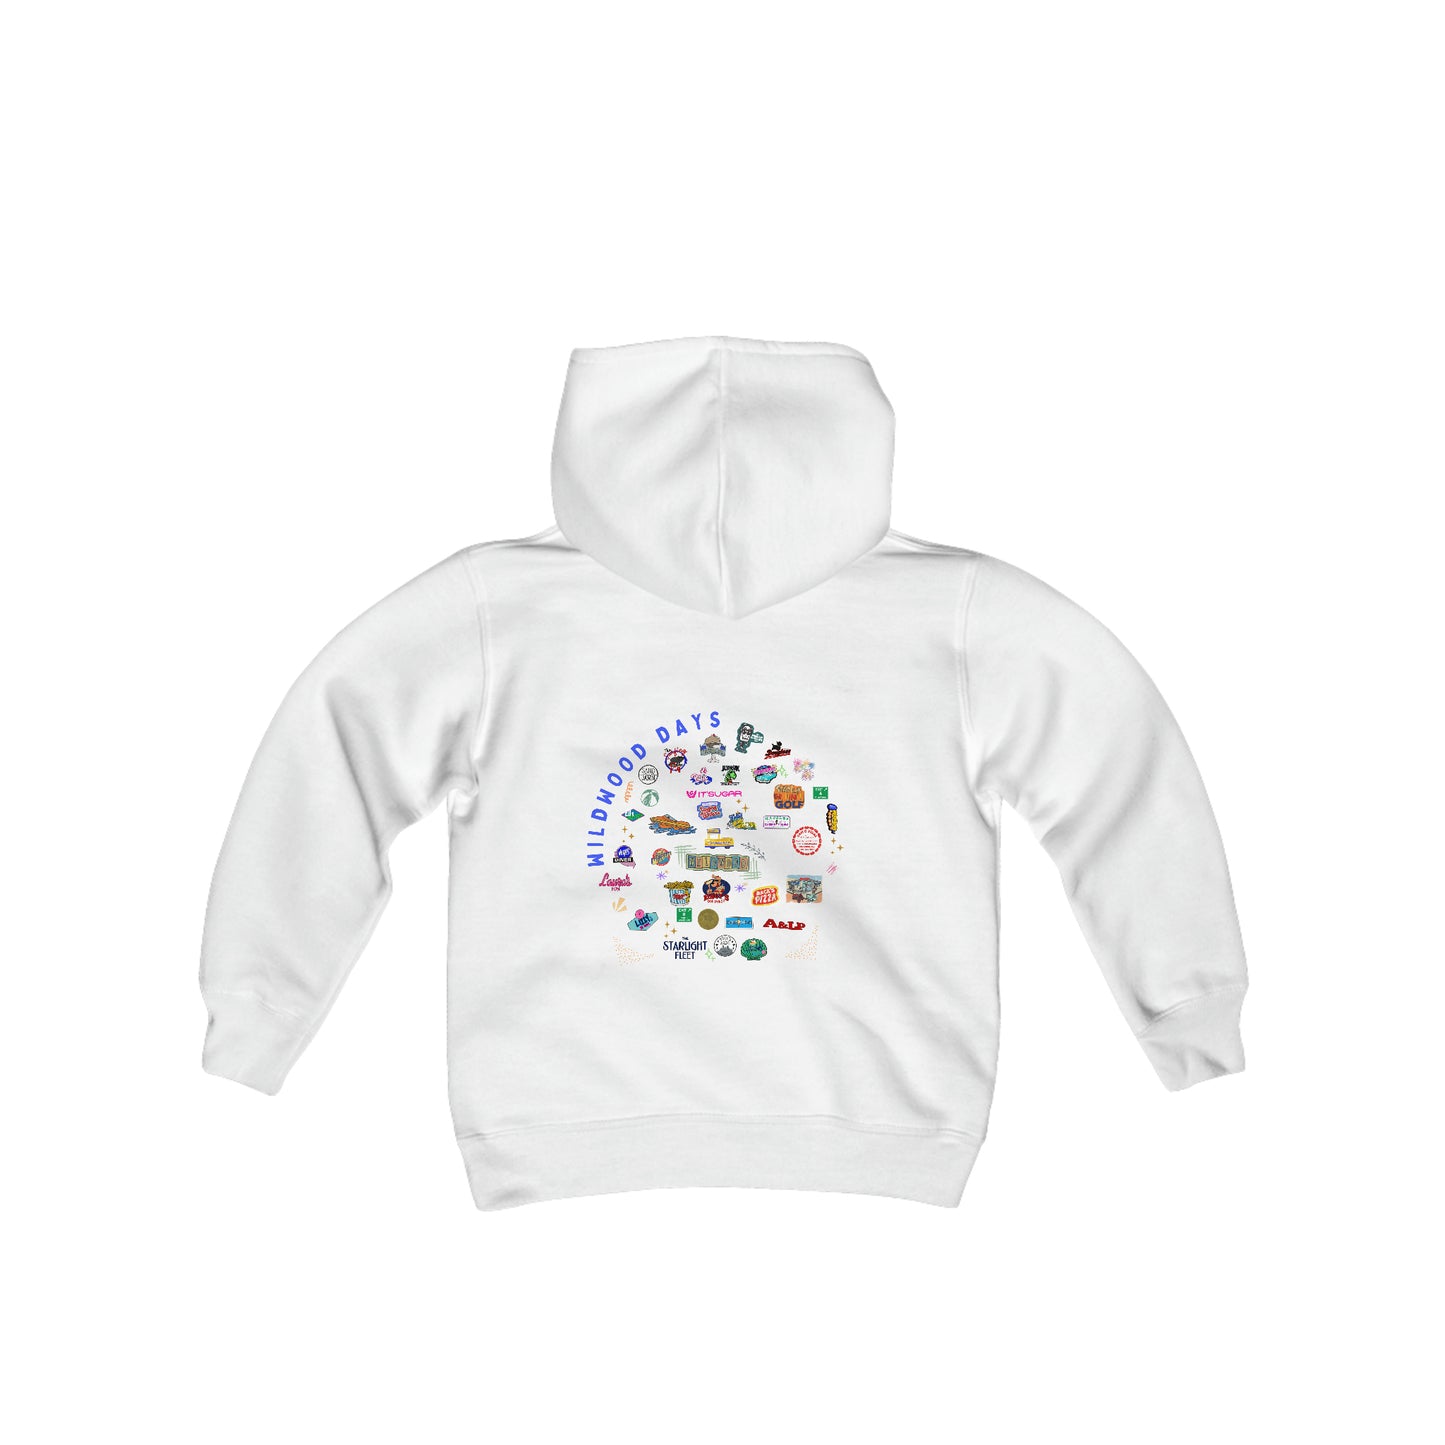 Wildwood, Wildwood Youth, Wildwood Youth Hoodie, Wildwood Decals, Heavy Blend Hooded Sweatshirt, Free Shipping